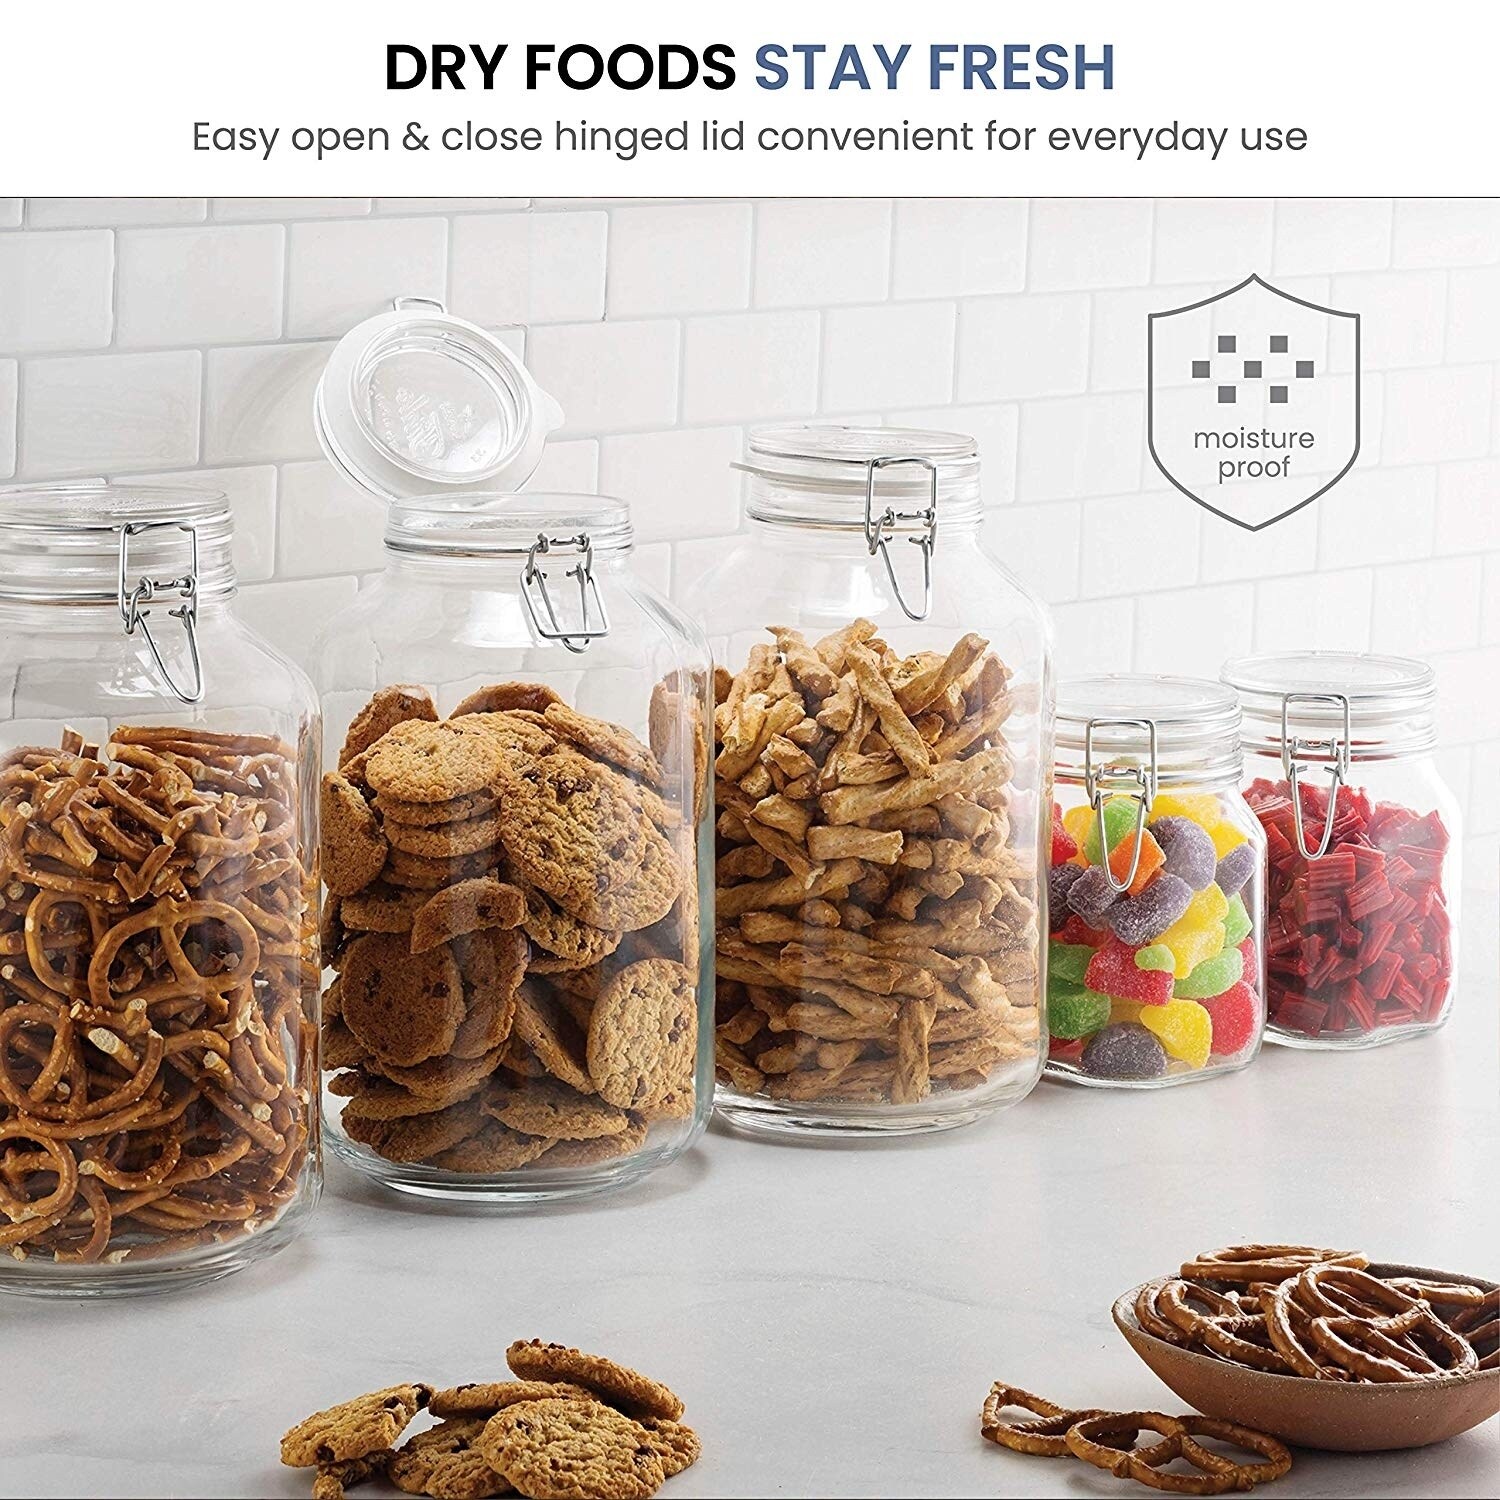 1.5 and 2 Liters 1 .5 Bormioli Rocco Fido Glass Canning Jars .75 5 Piece Set of 5 Five 